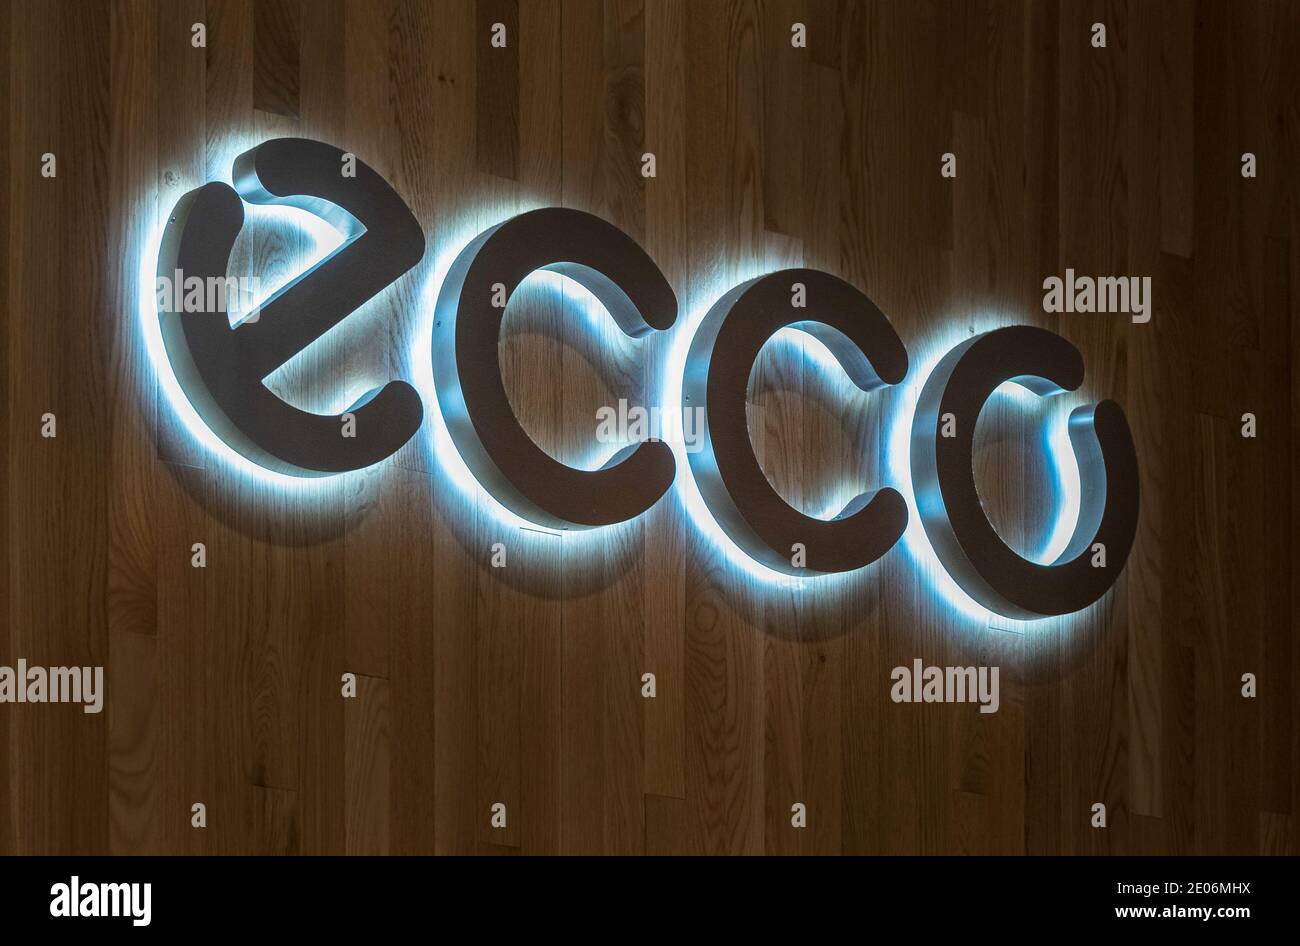 Ecco Shoes High Resolution Stock Photography and - Alamy